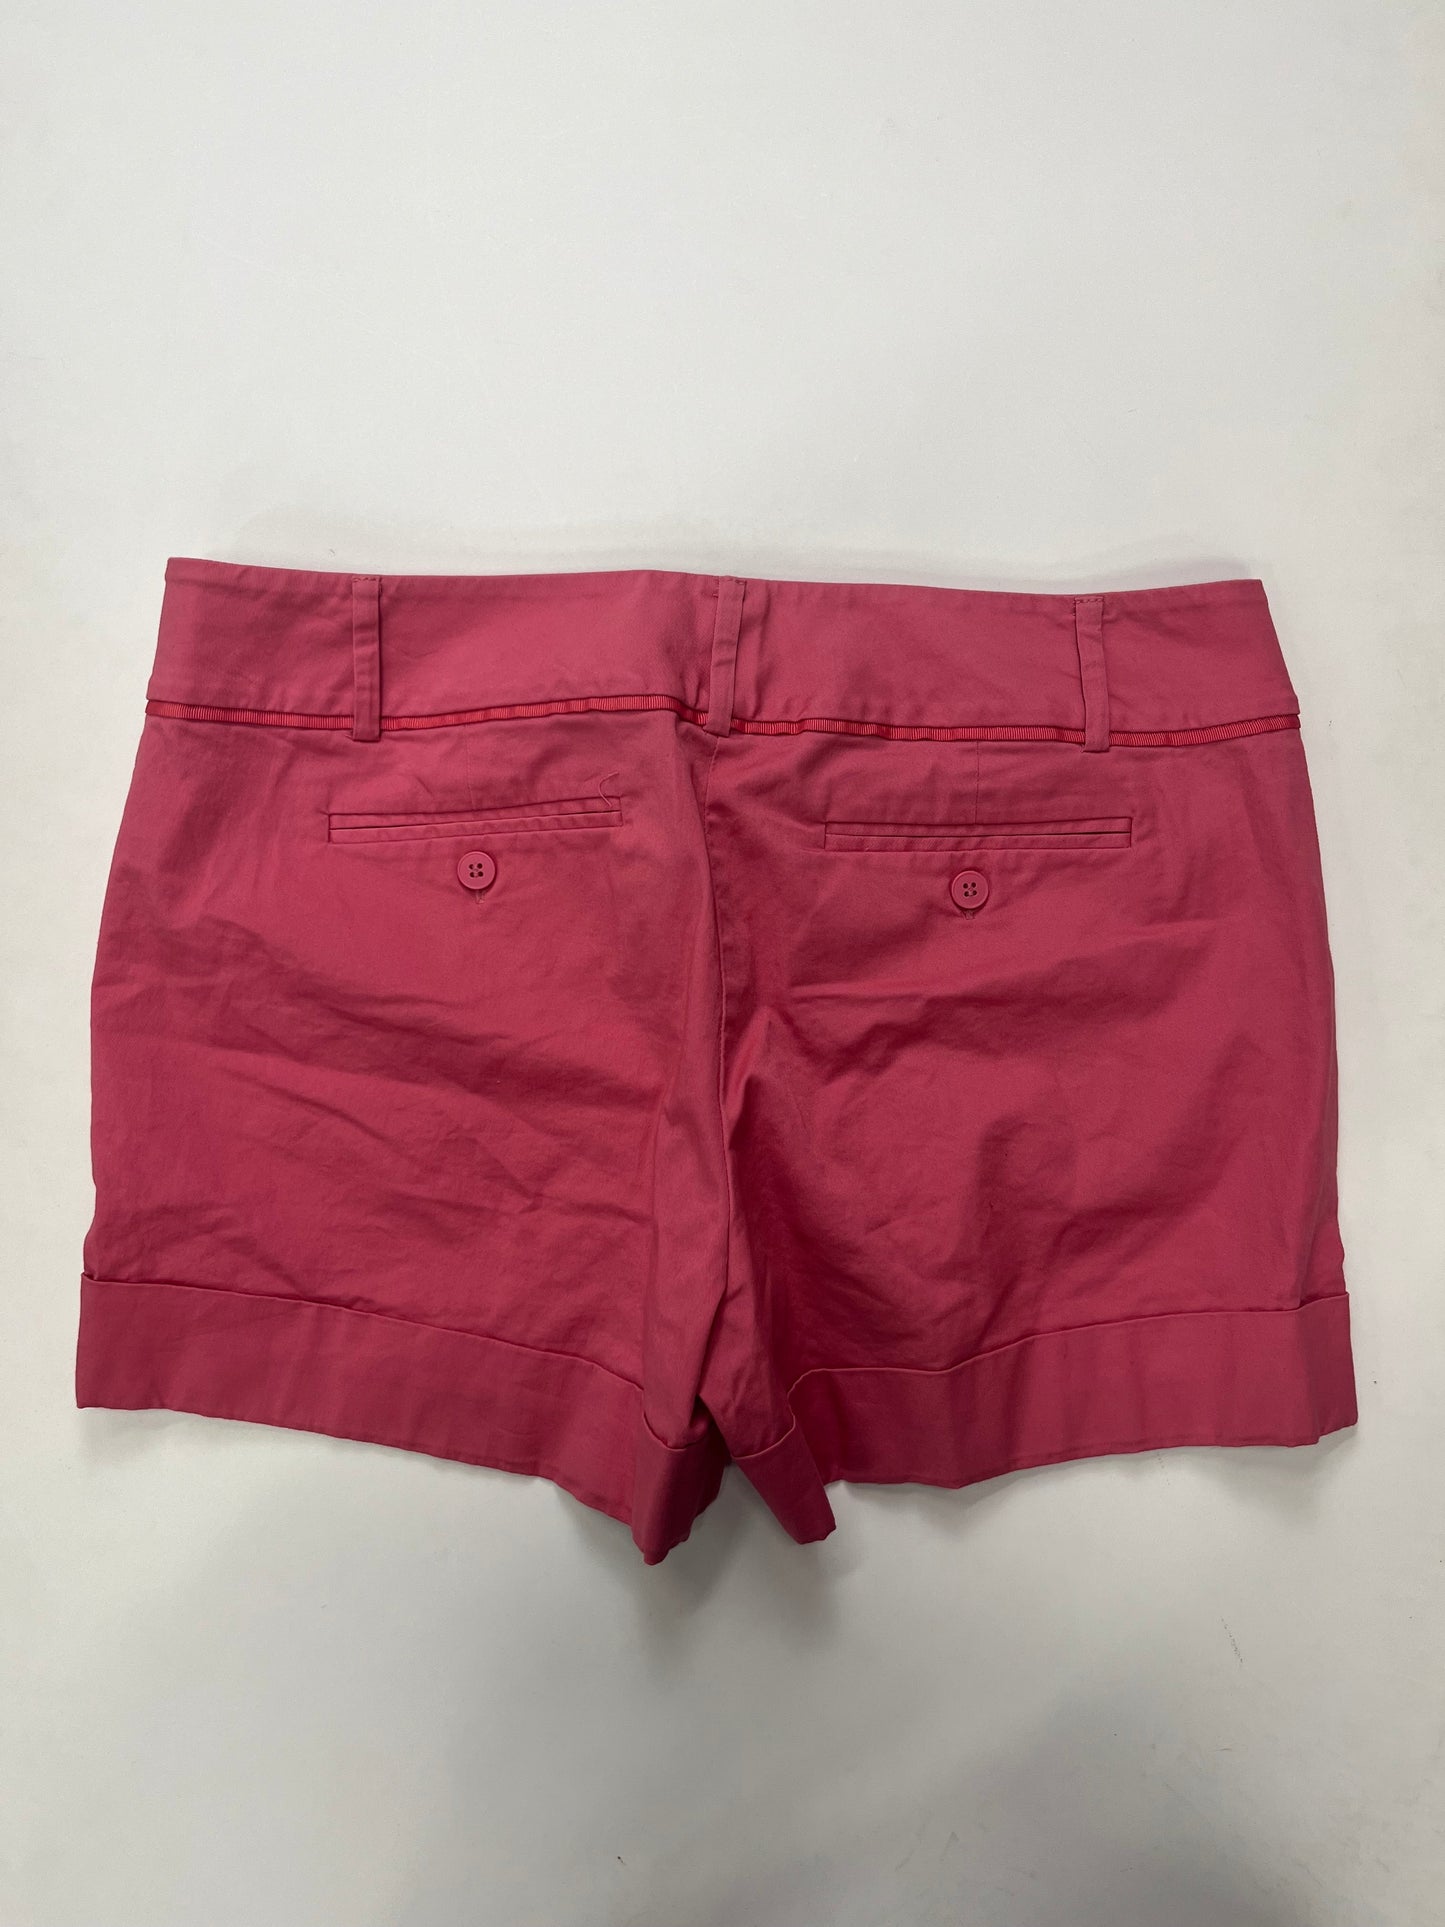 Shorts By 7th Avenue  Size: 12